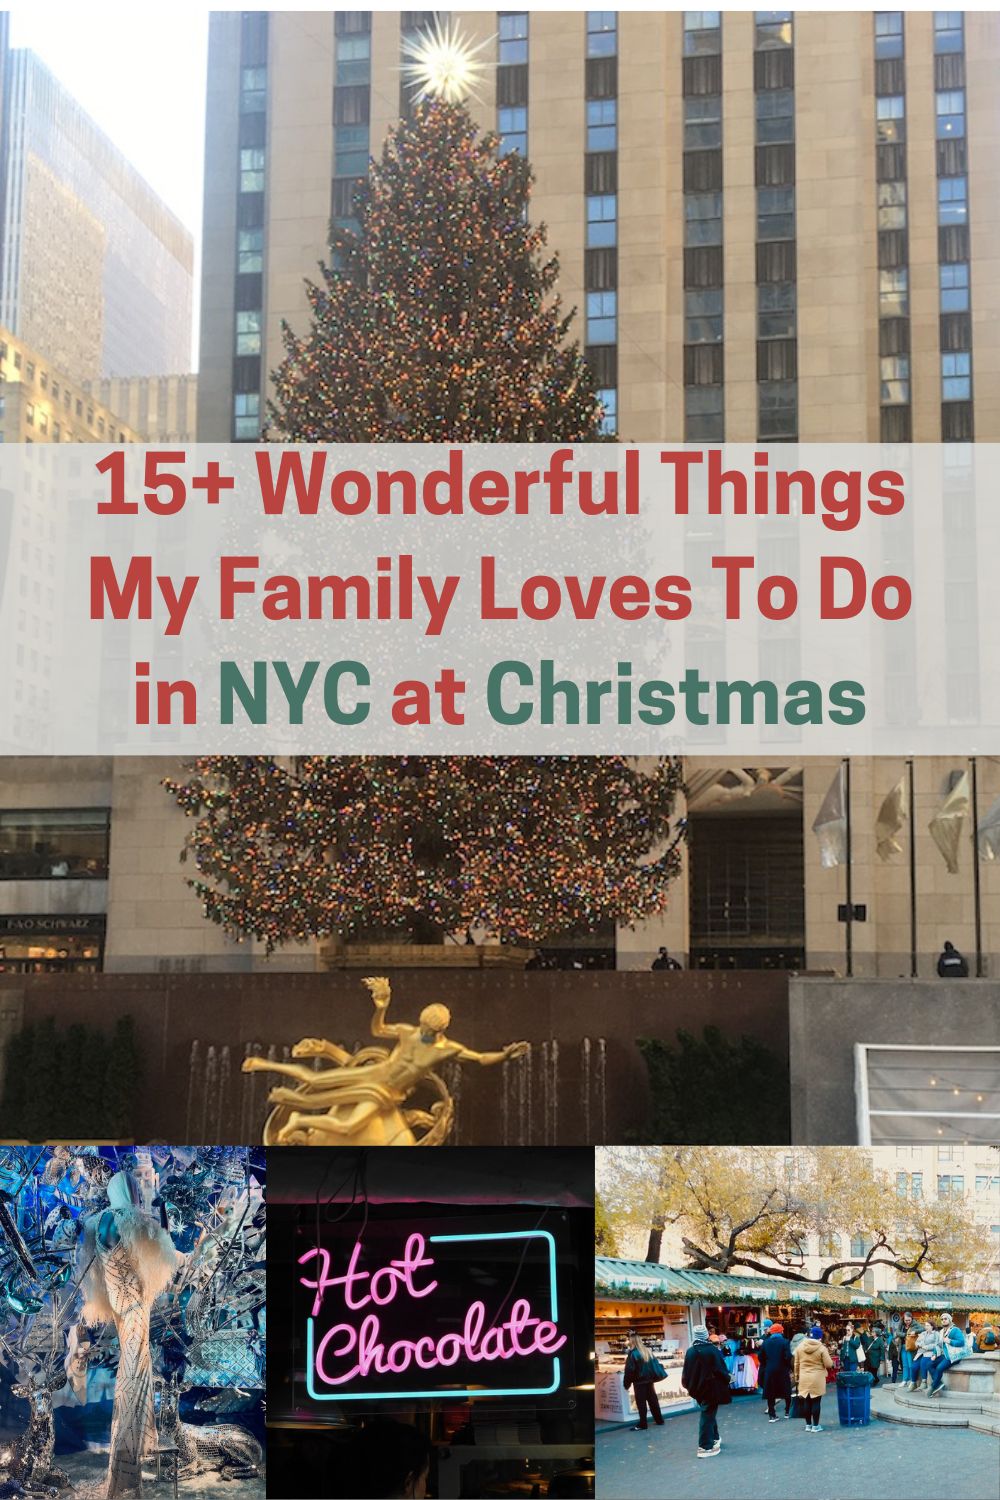 christmas in nyc is amazingly fun. here are 15+ holiday attractions that my family never misses. plus, tips on what to skip during a december visit with kids.